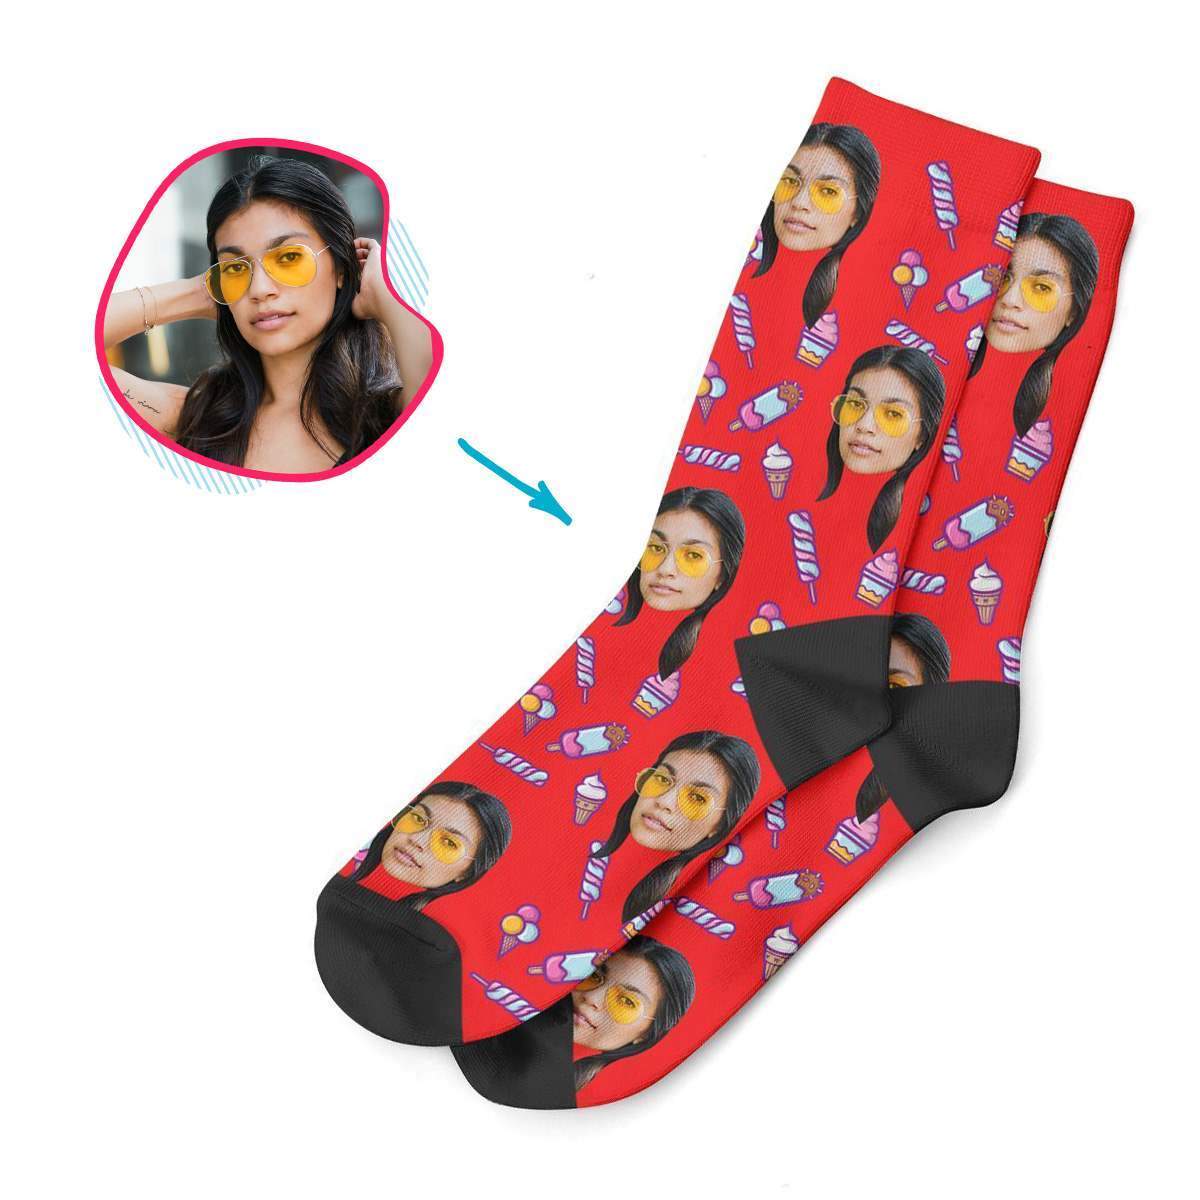 red Candies socks personalized with photo of face printed on them